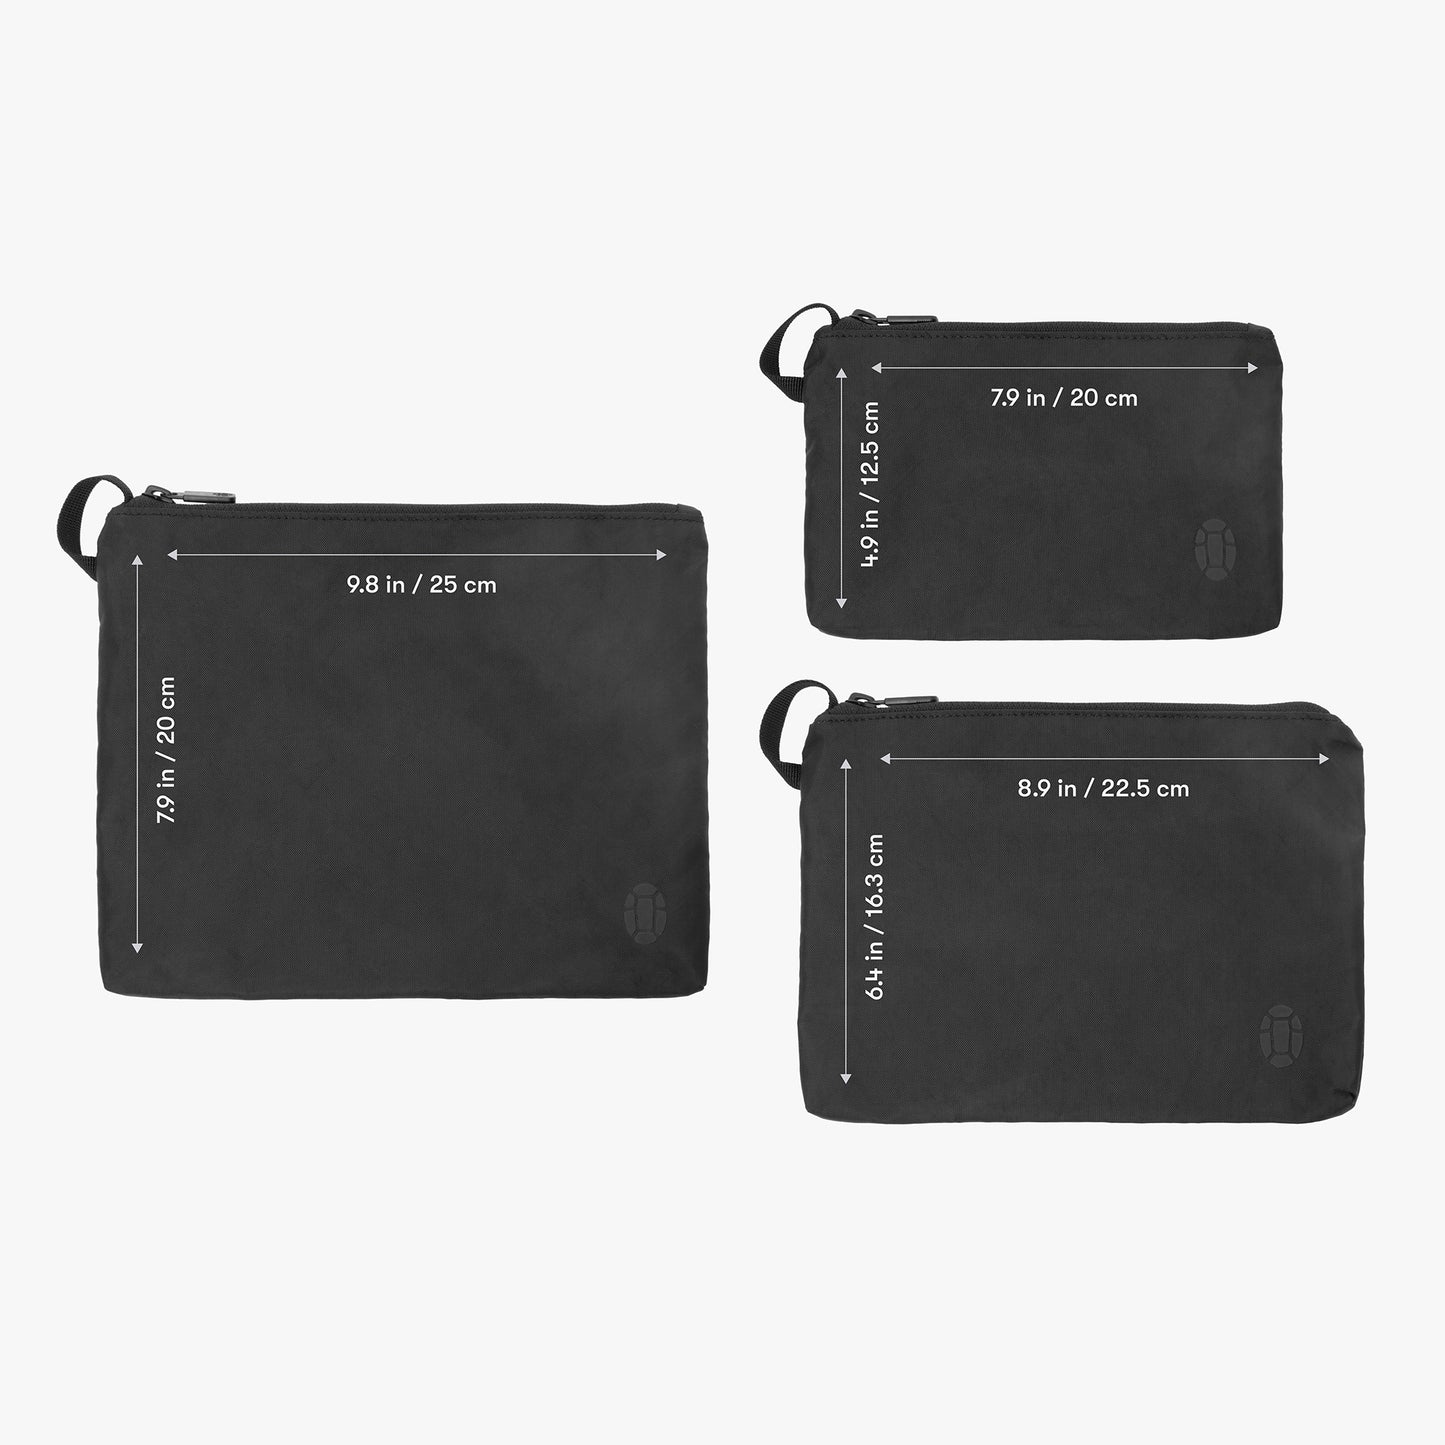 Three sizes to organize all your gear